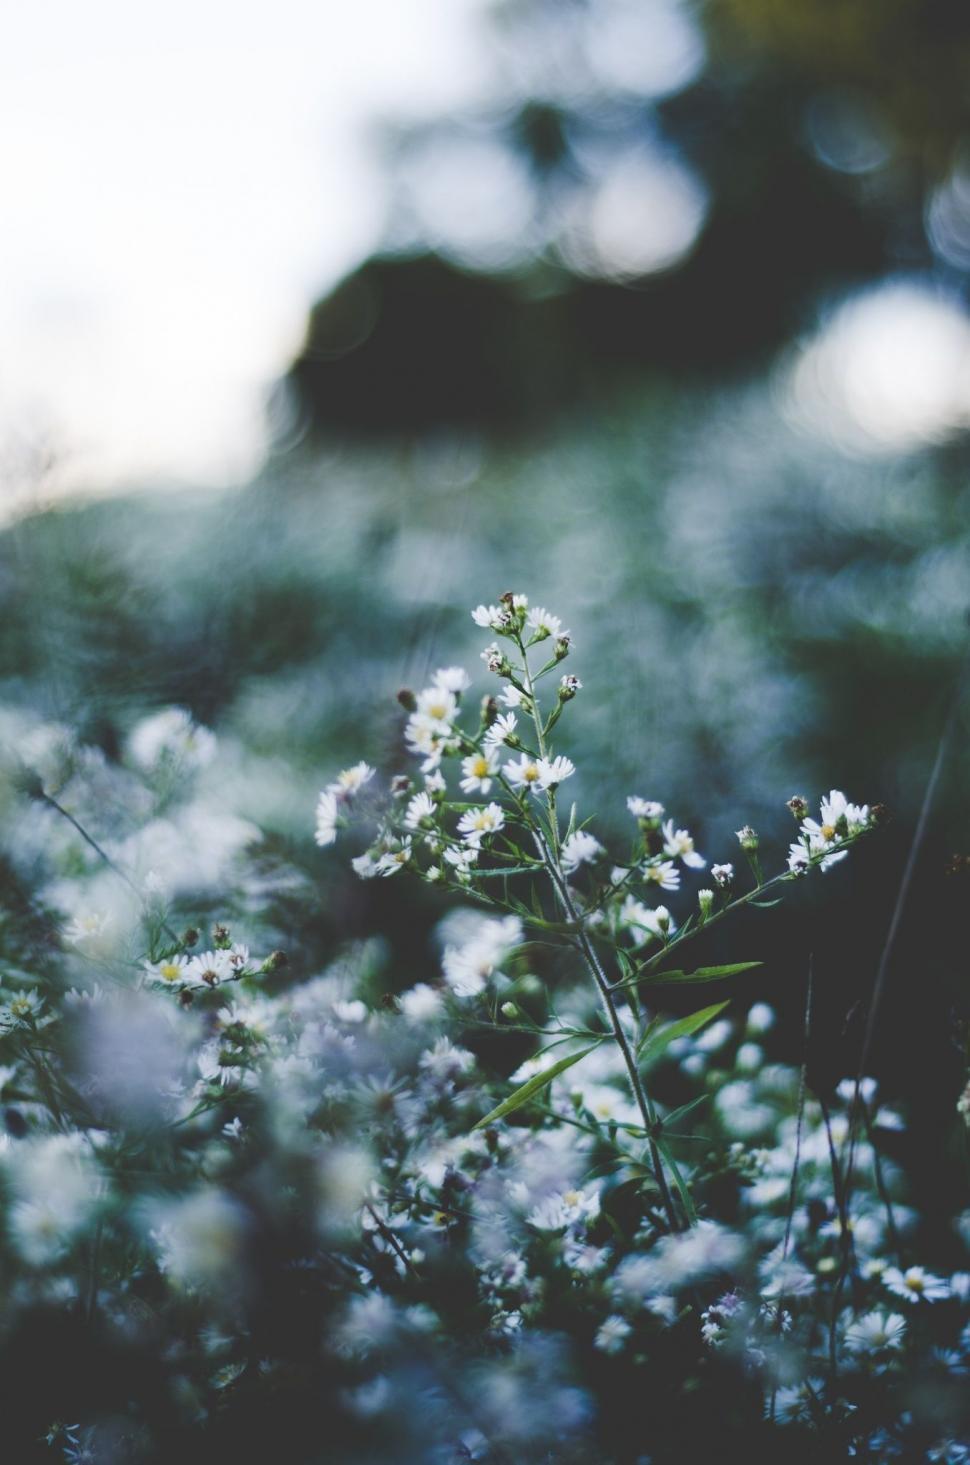 Free Image of Cluster of Flowers Nestled in Grass 